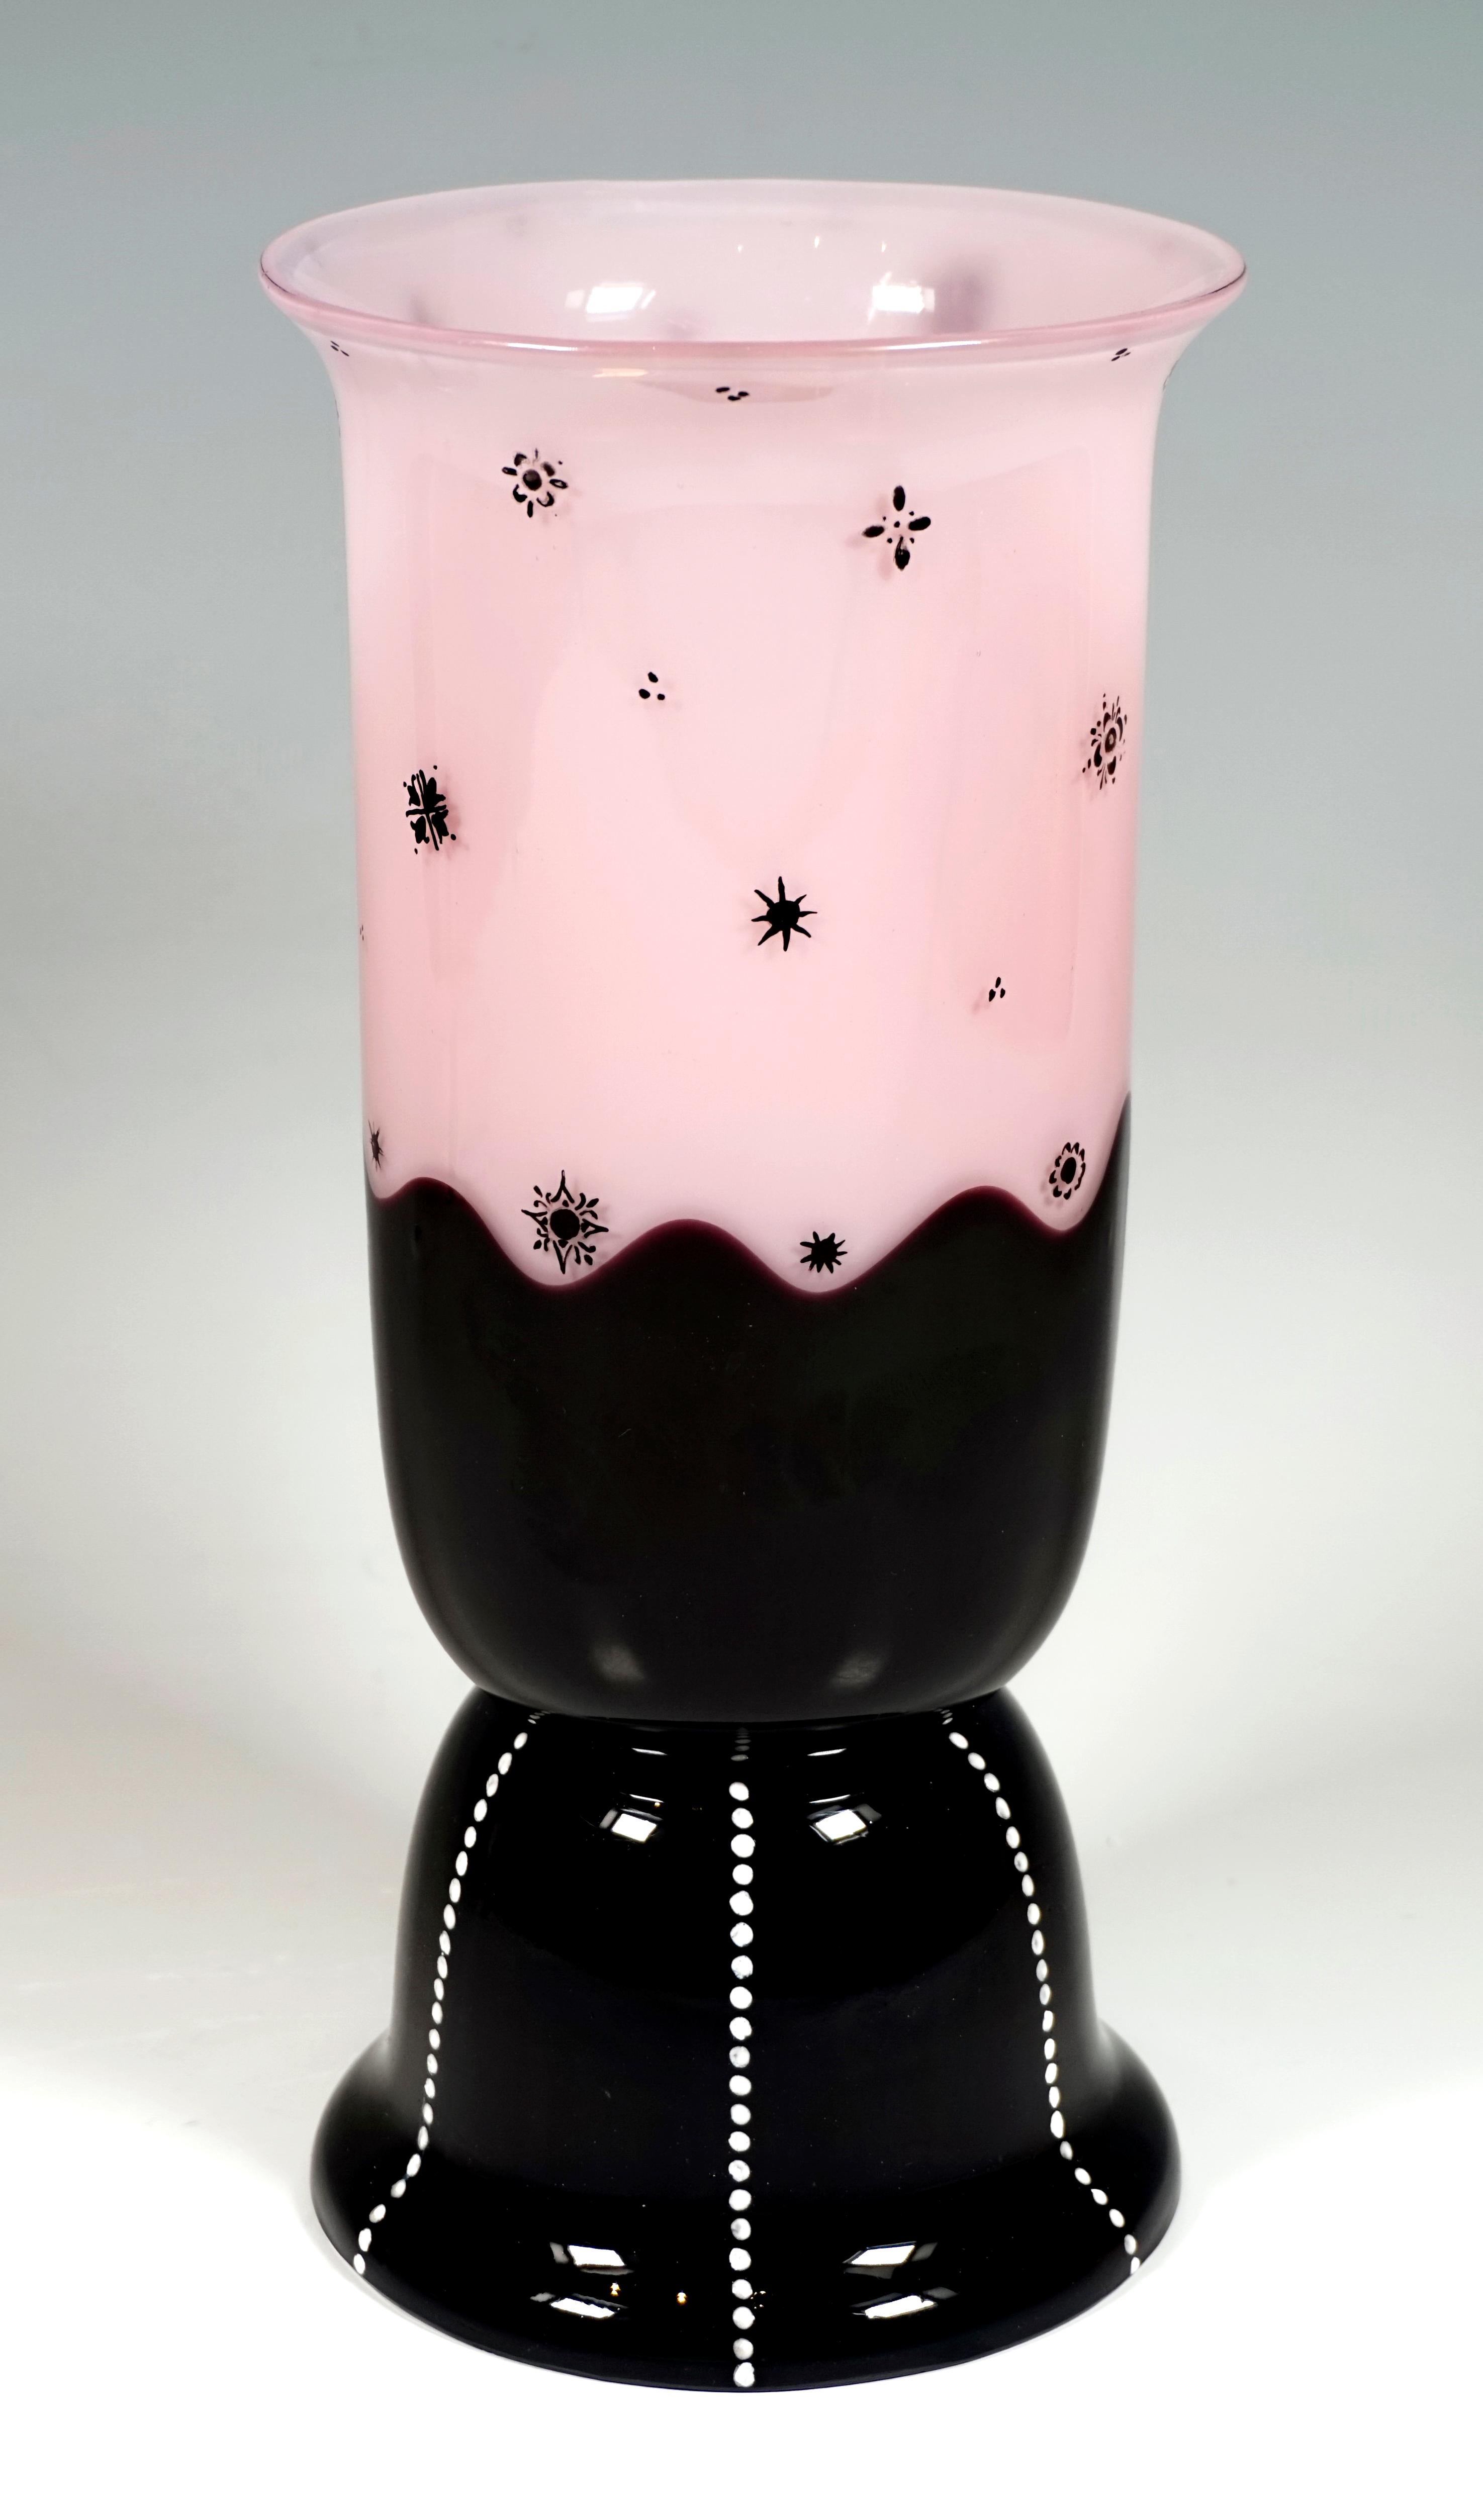 Body blown in a model, cylindrical with flared mouth rim, constriction in the lower third, forming a stepped, high arched base with flared rim, object divided in the middle by a wavy line into 2 colored areas: lower area black, upper area opal pink